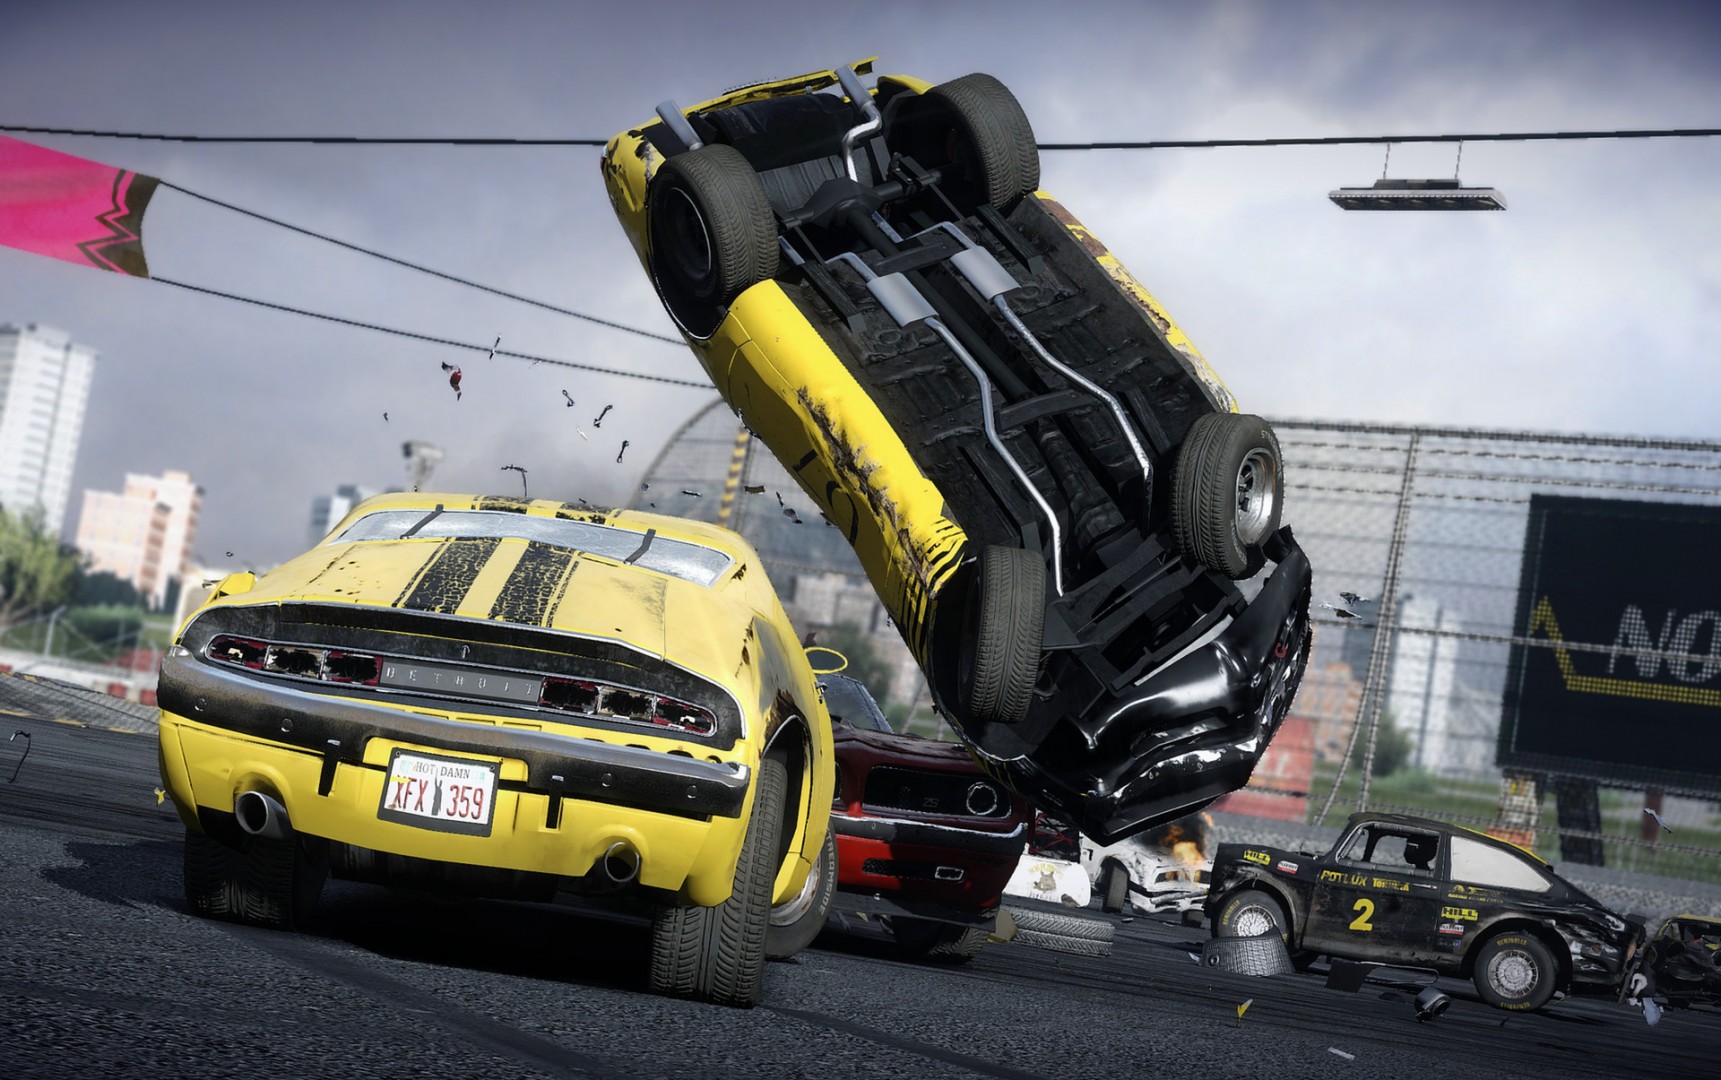 New Wreckfest Pc Update Adds 4 New Tracks 5 New Vehicles New Career Events And More